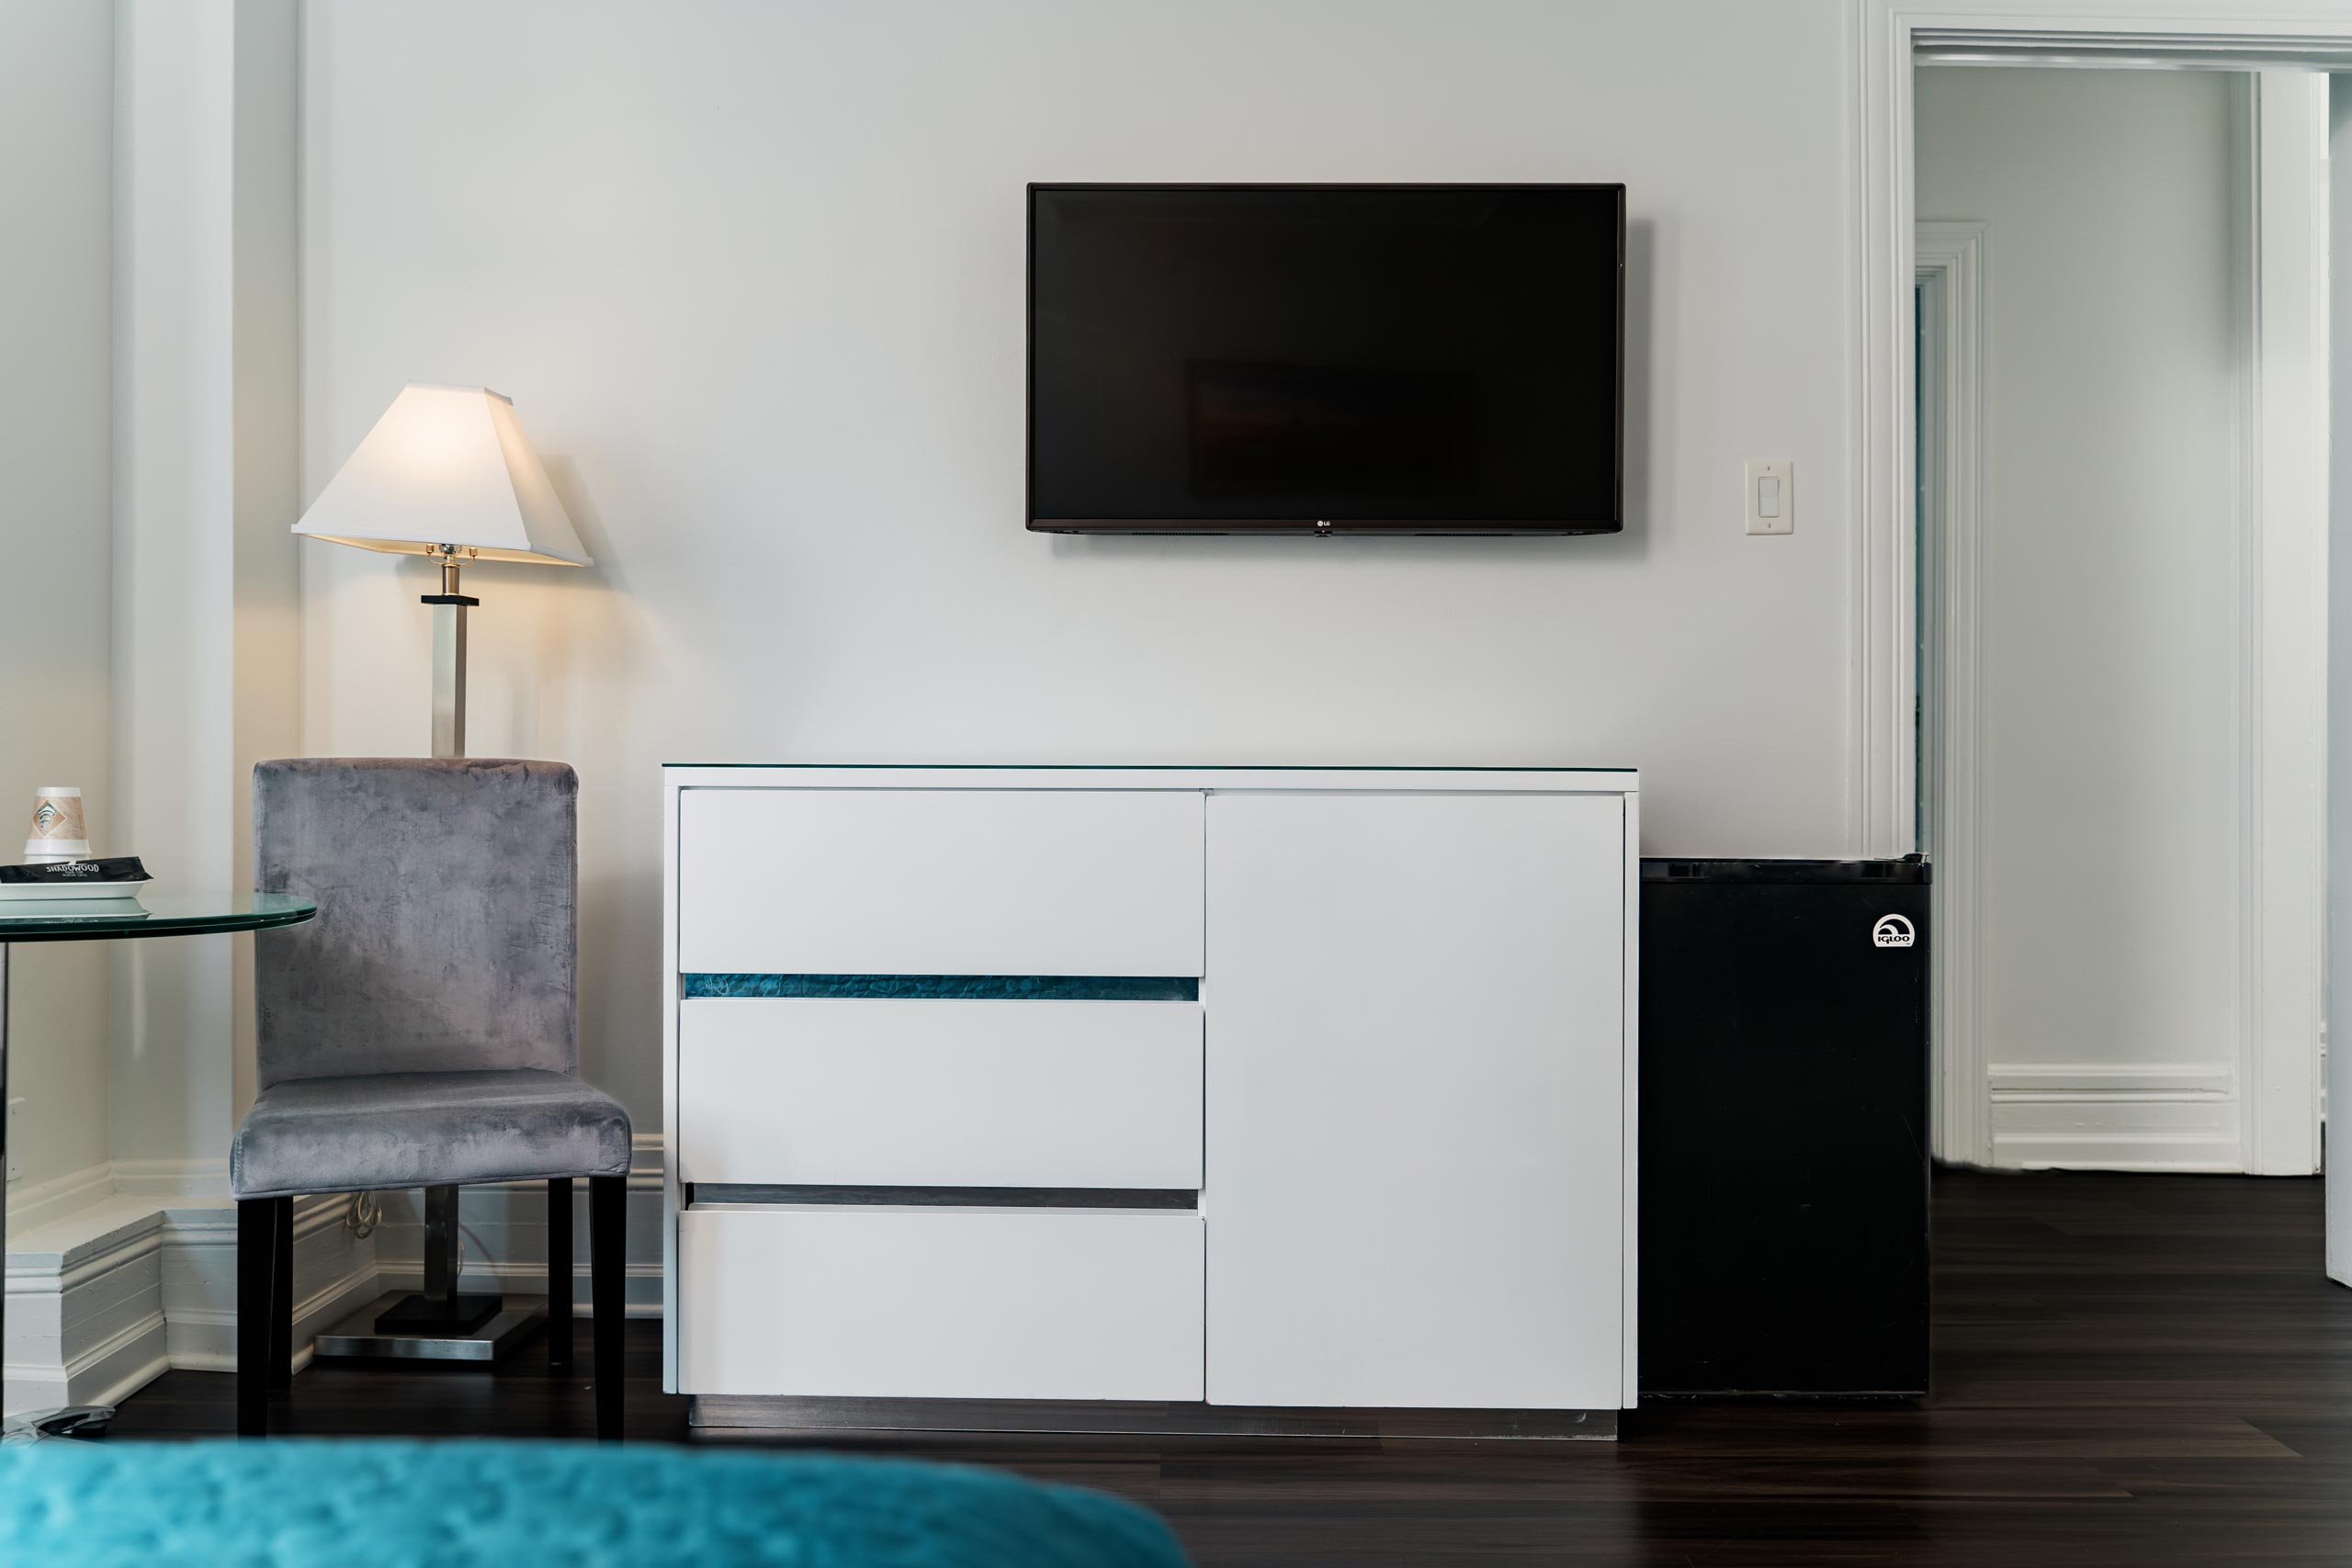 TV mounted on a wall and a storage cabinet